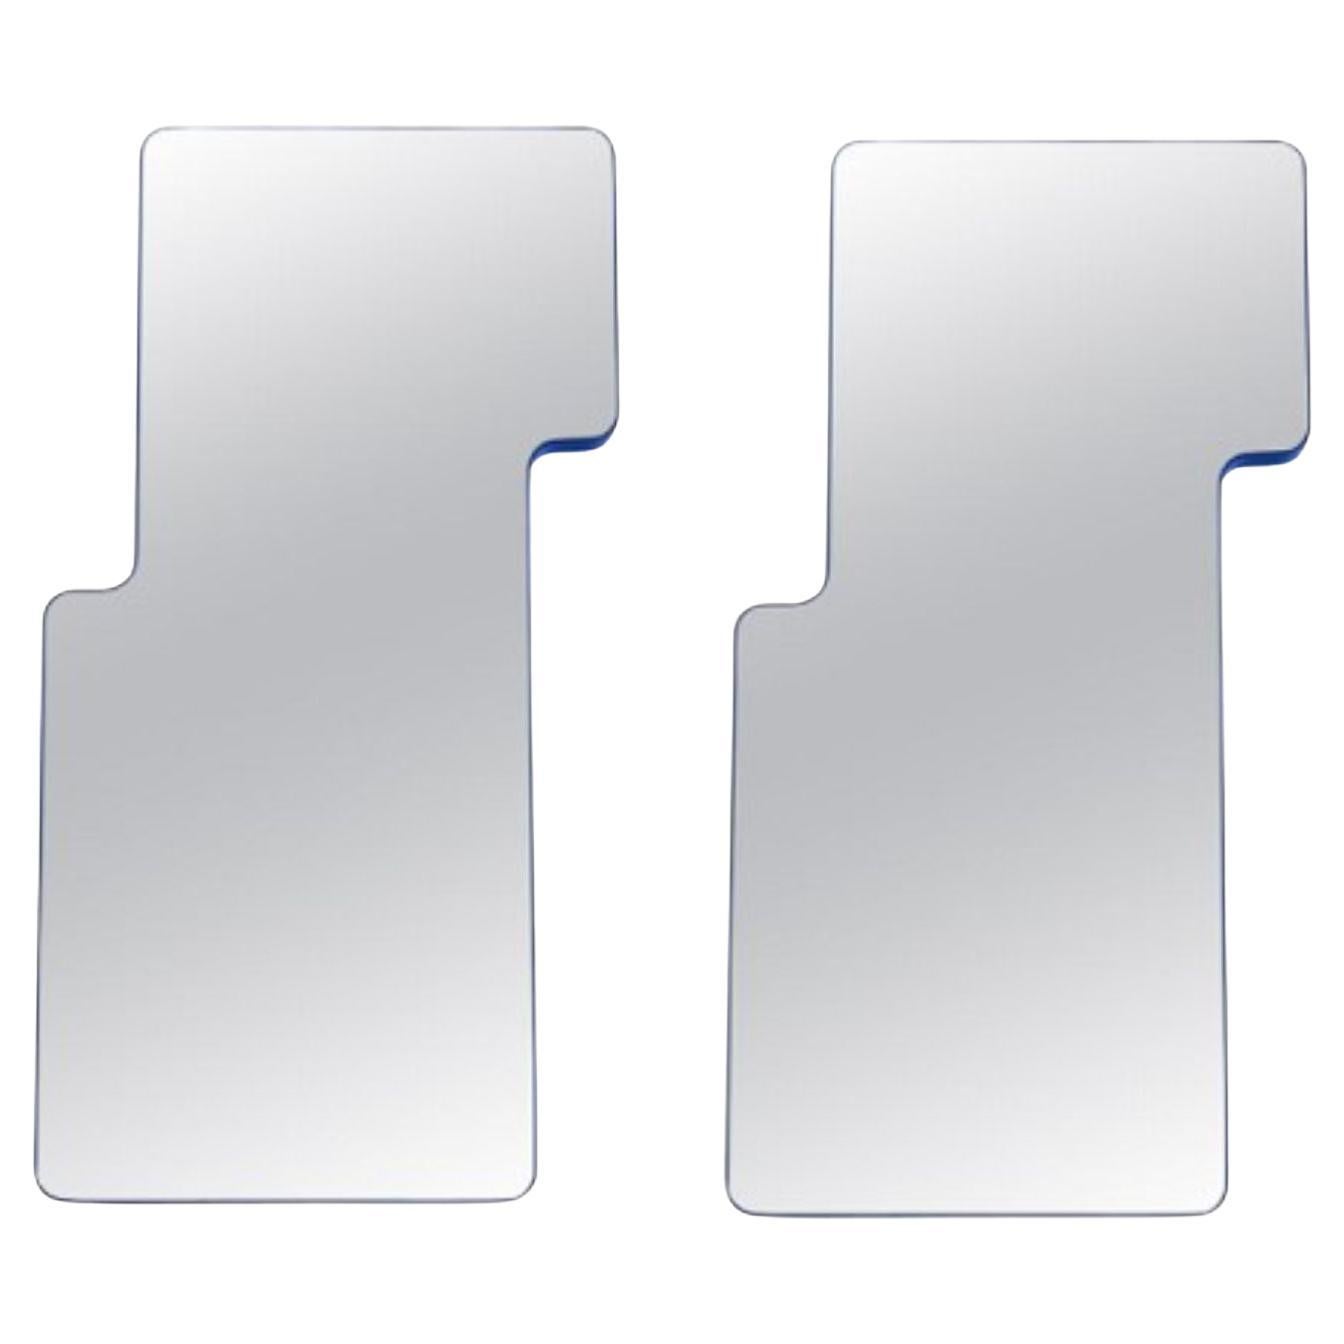 Set of 2 Loveself 04 Mirrors by Oito